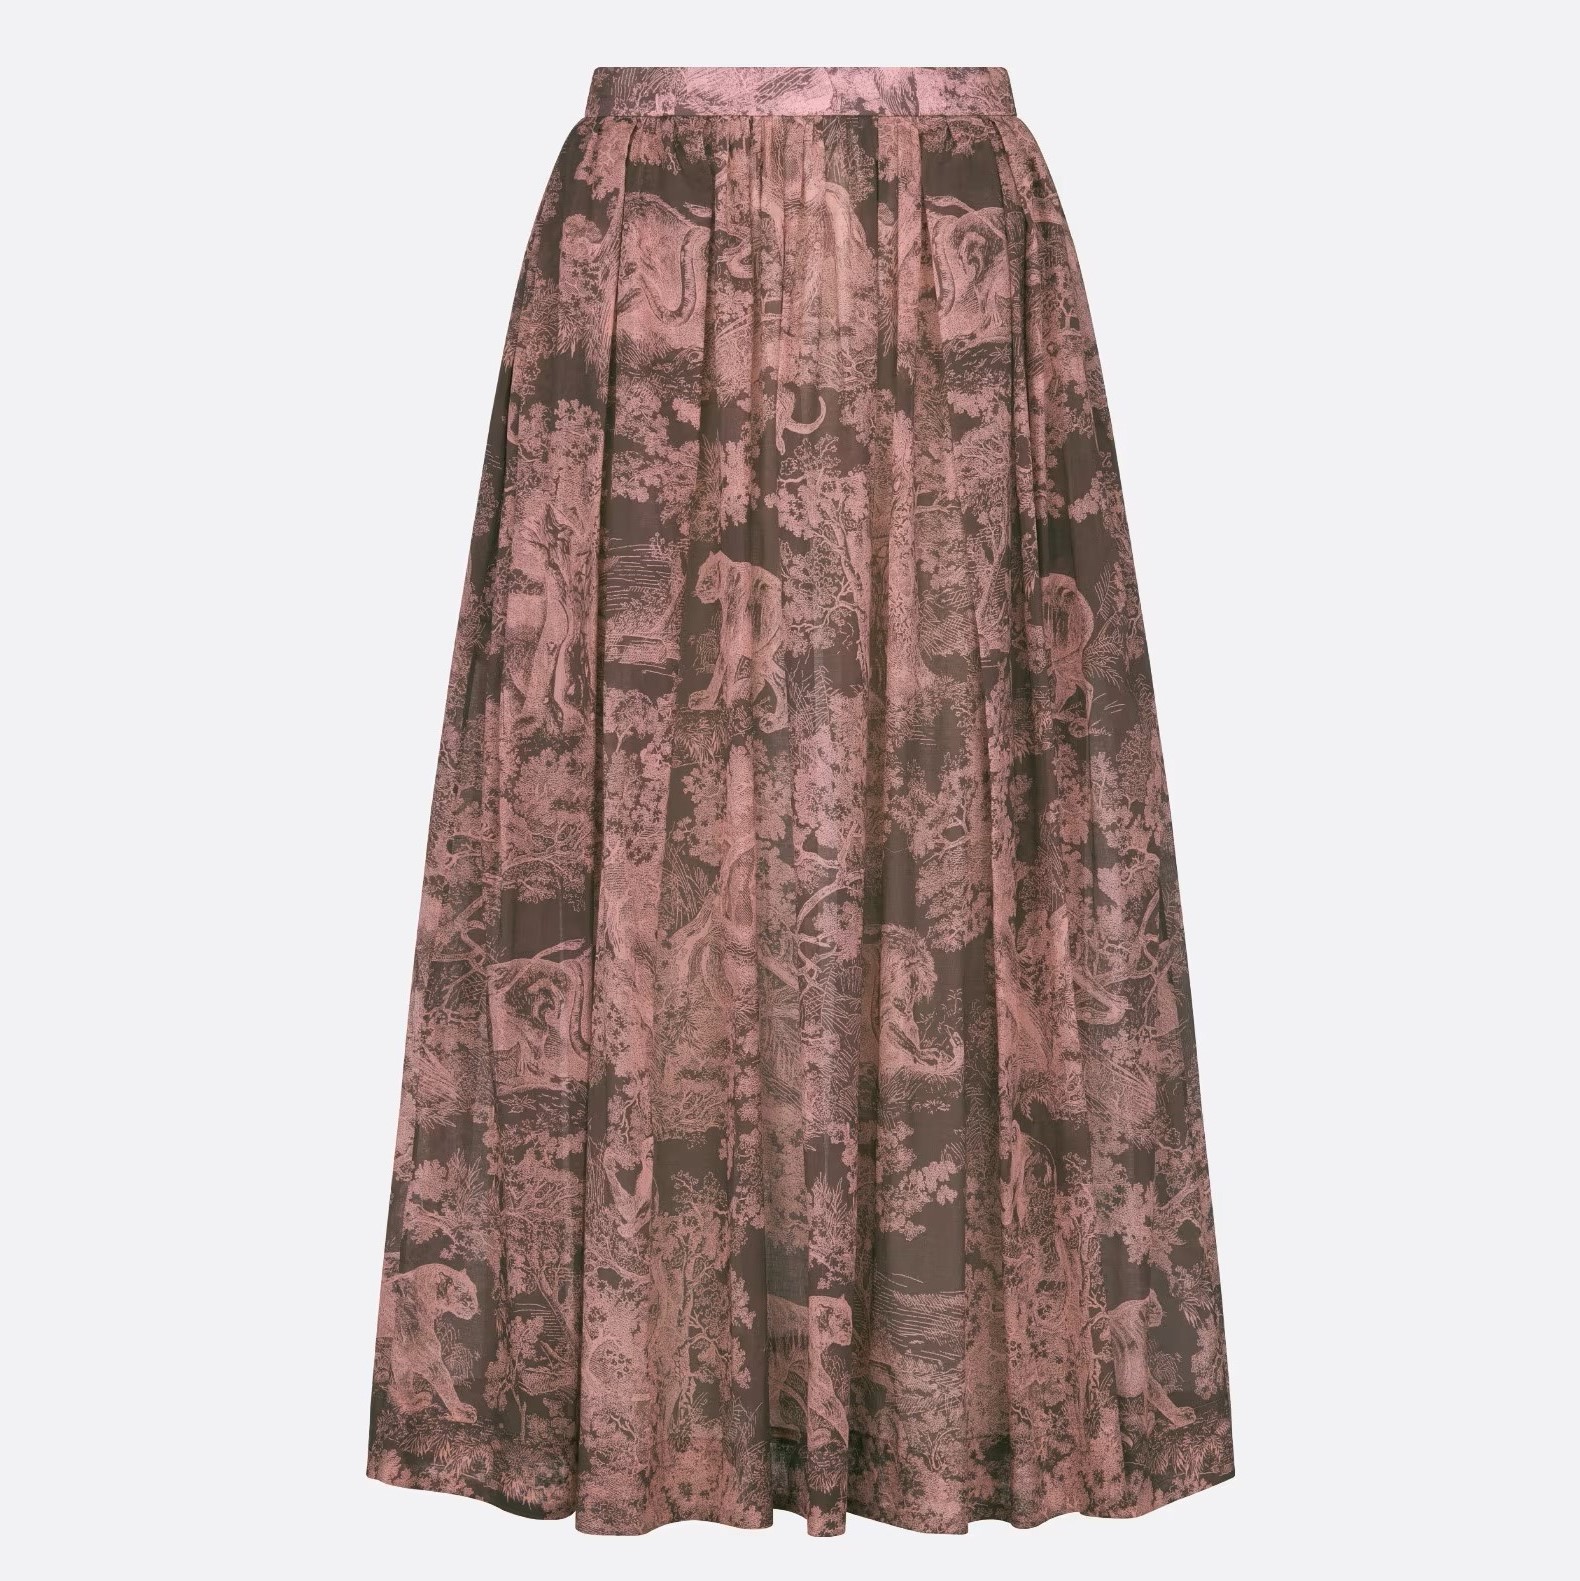 VÁY DIORIVIERA FLARED SKIRT GRAY AND PINK COTTON MUSLIN WITH TOILE DE JOUY REVERSE MOTIF 3